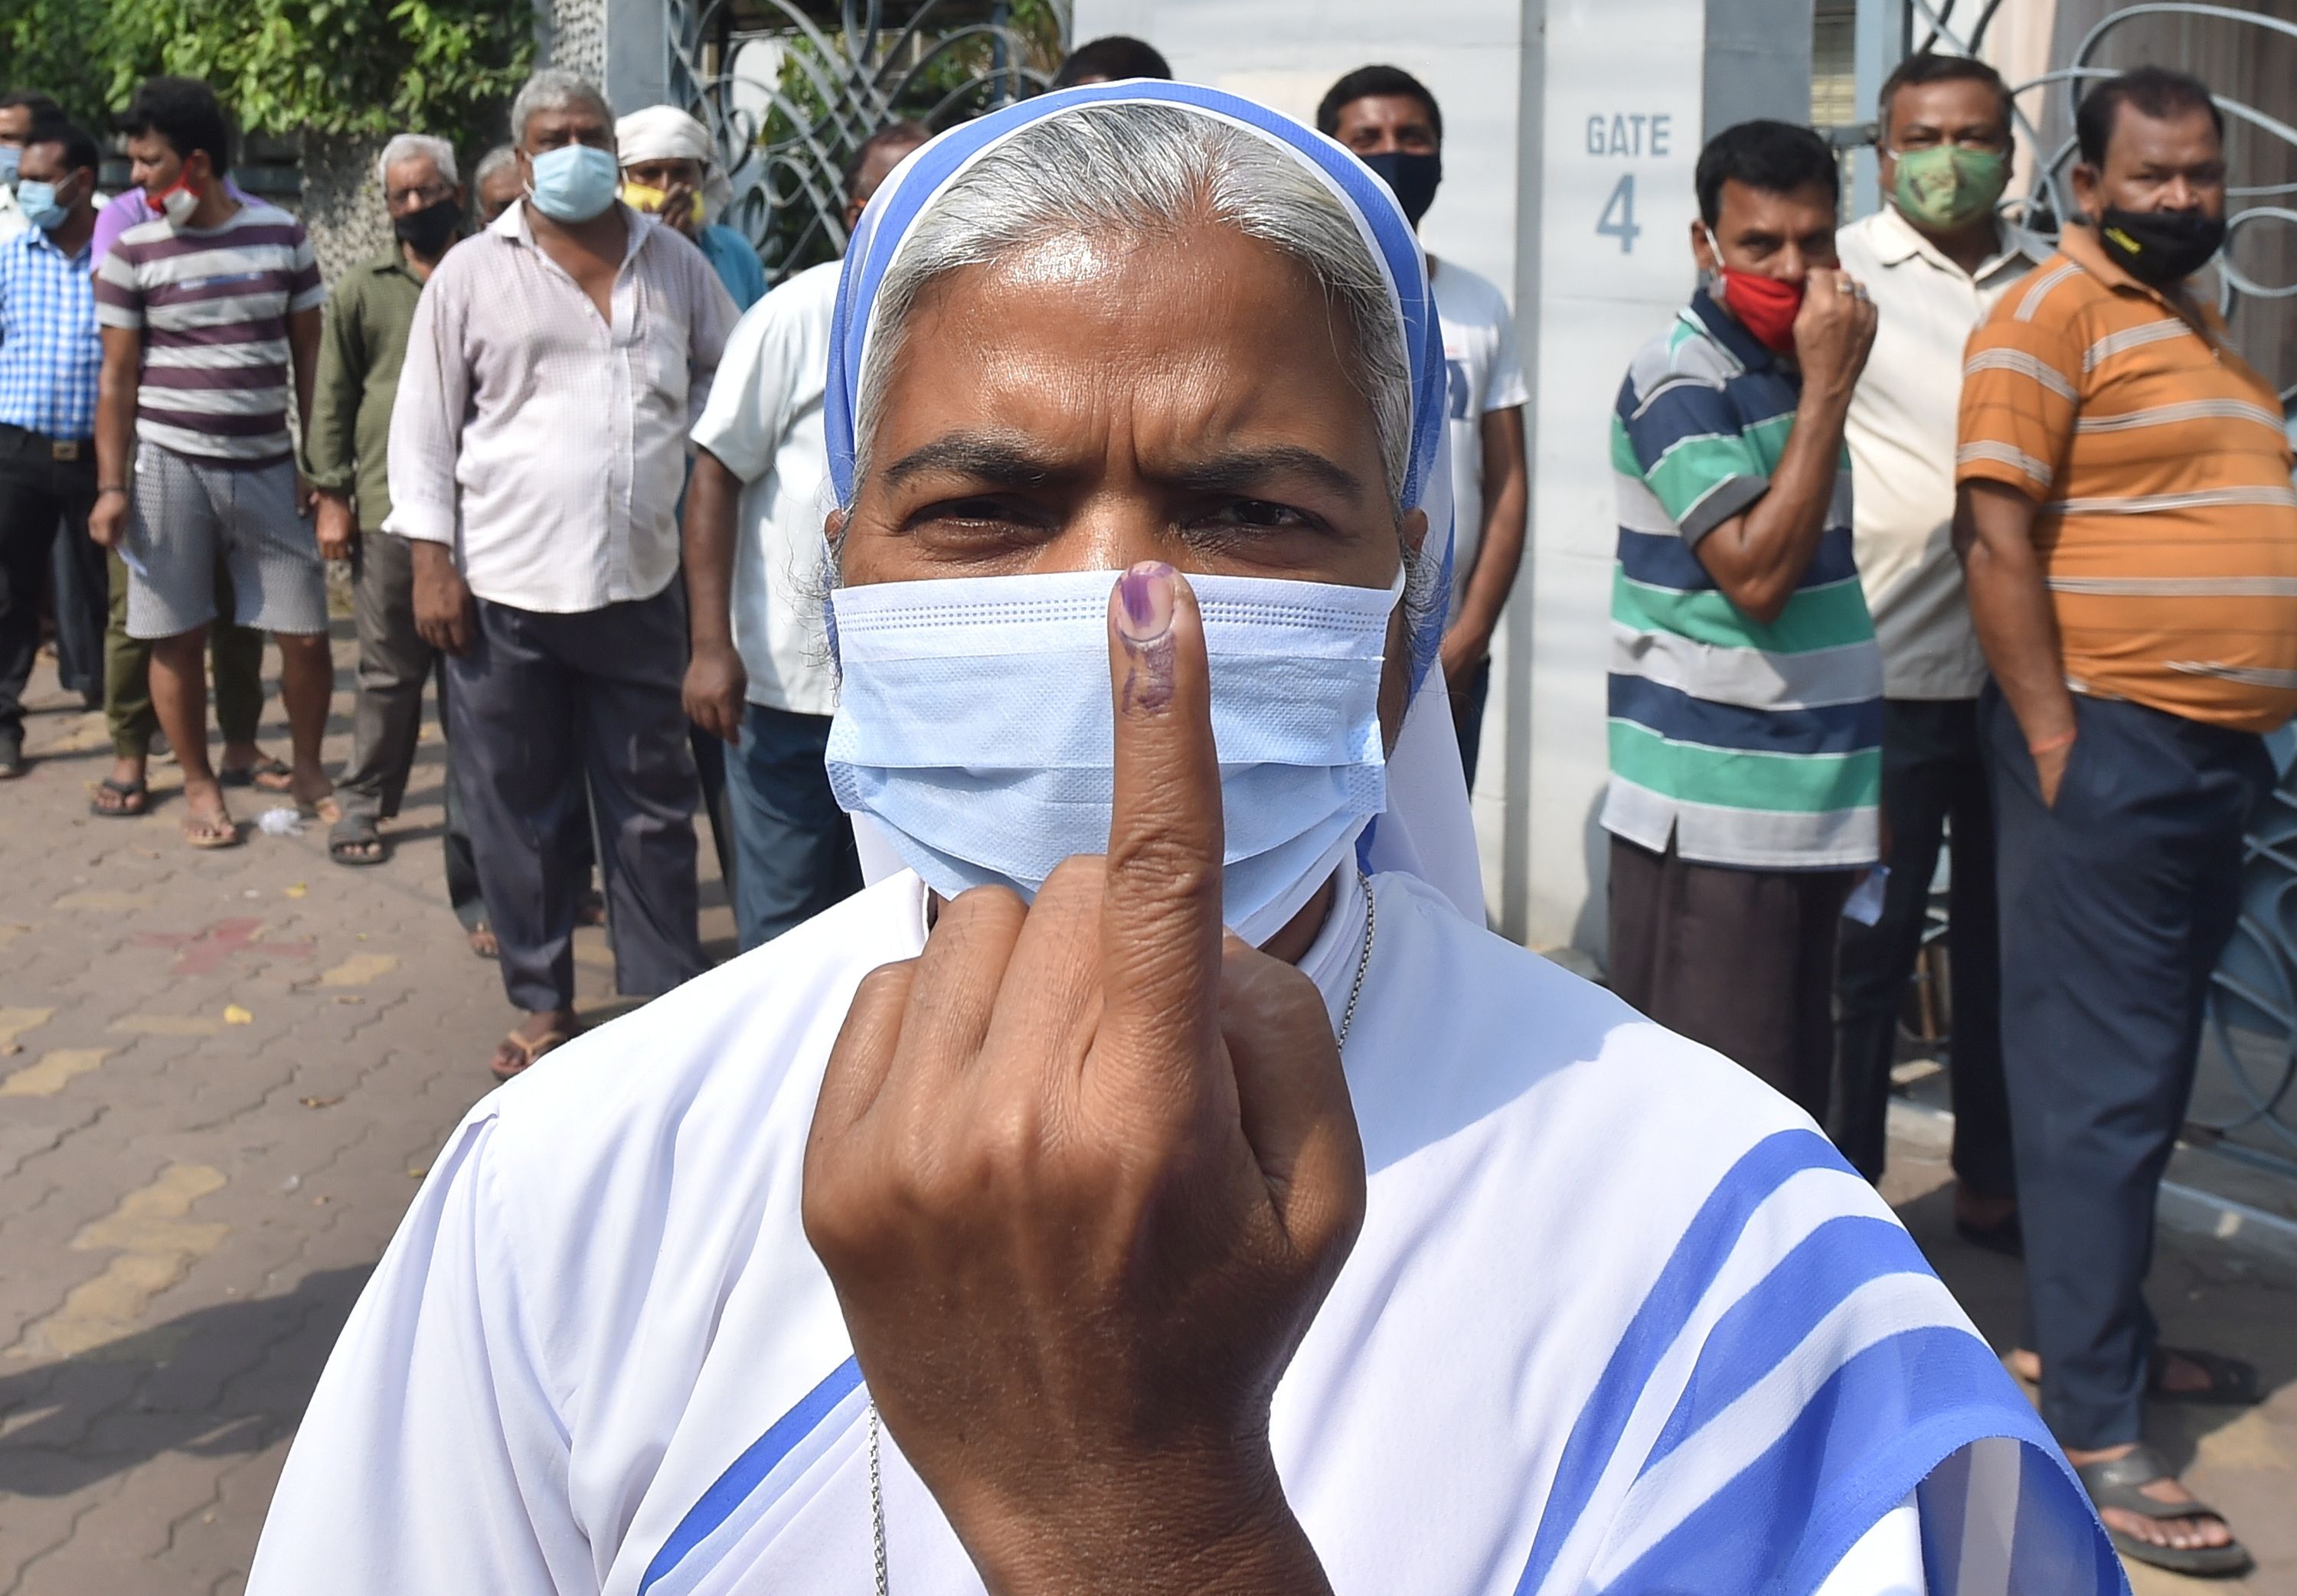 A nun of Missionaries of charity shows her finger marked with indelible ink after casting vote during the 7th phase of State Assembly poll at a polling station in Kolkata, Monday, April 26, 2021. (PTI Photo)